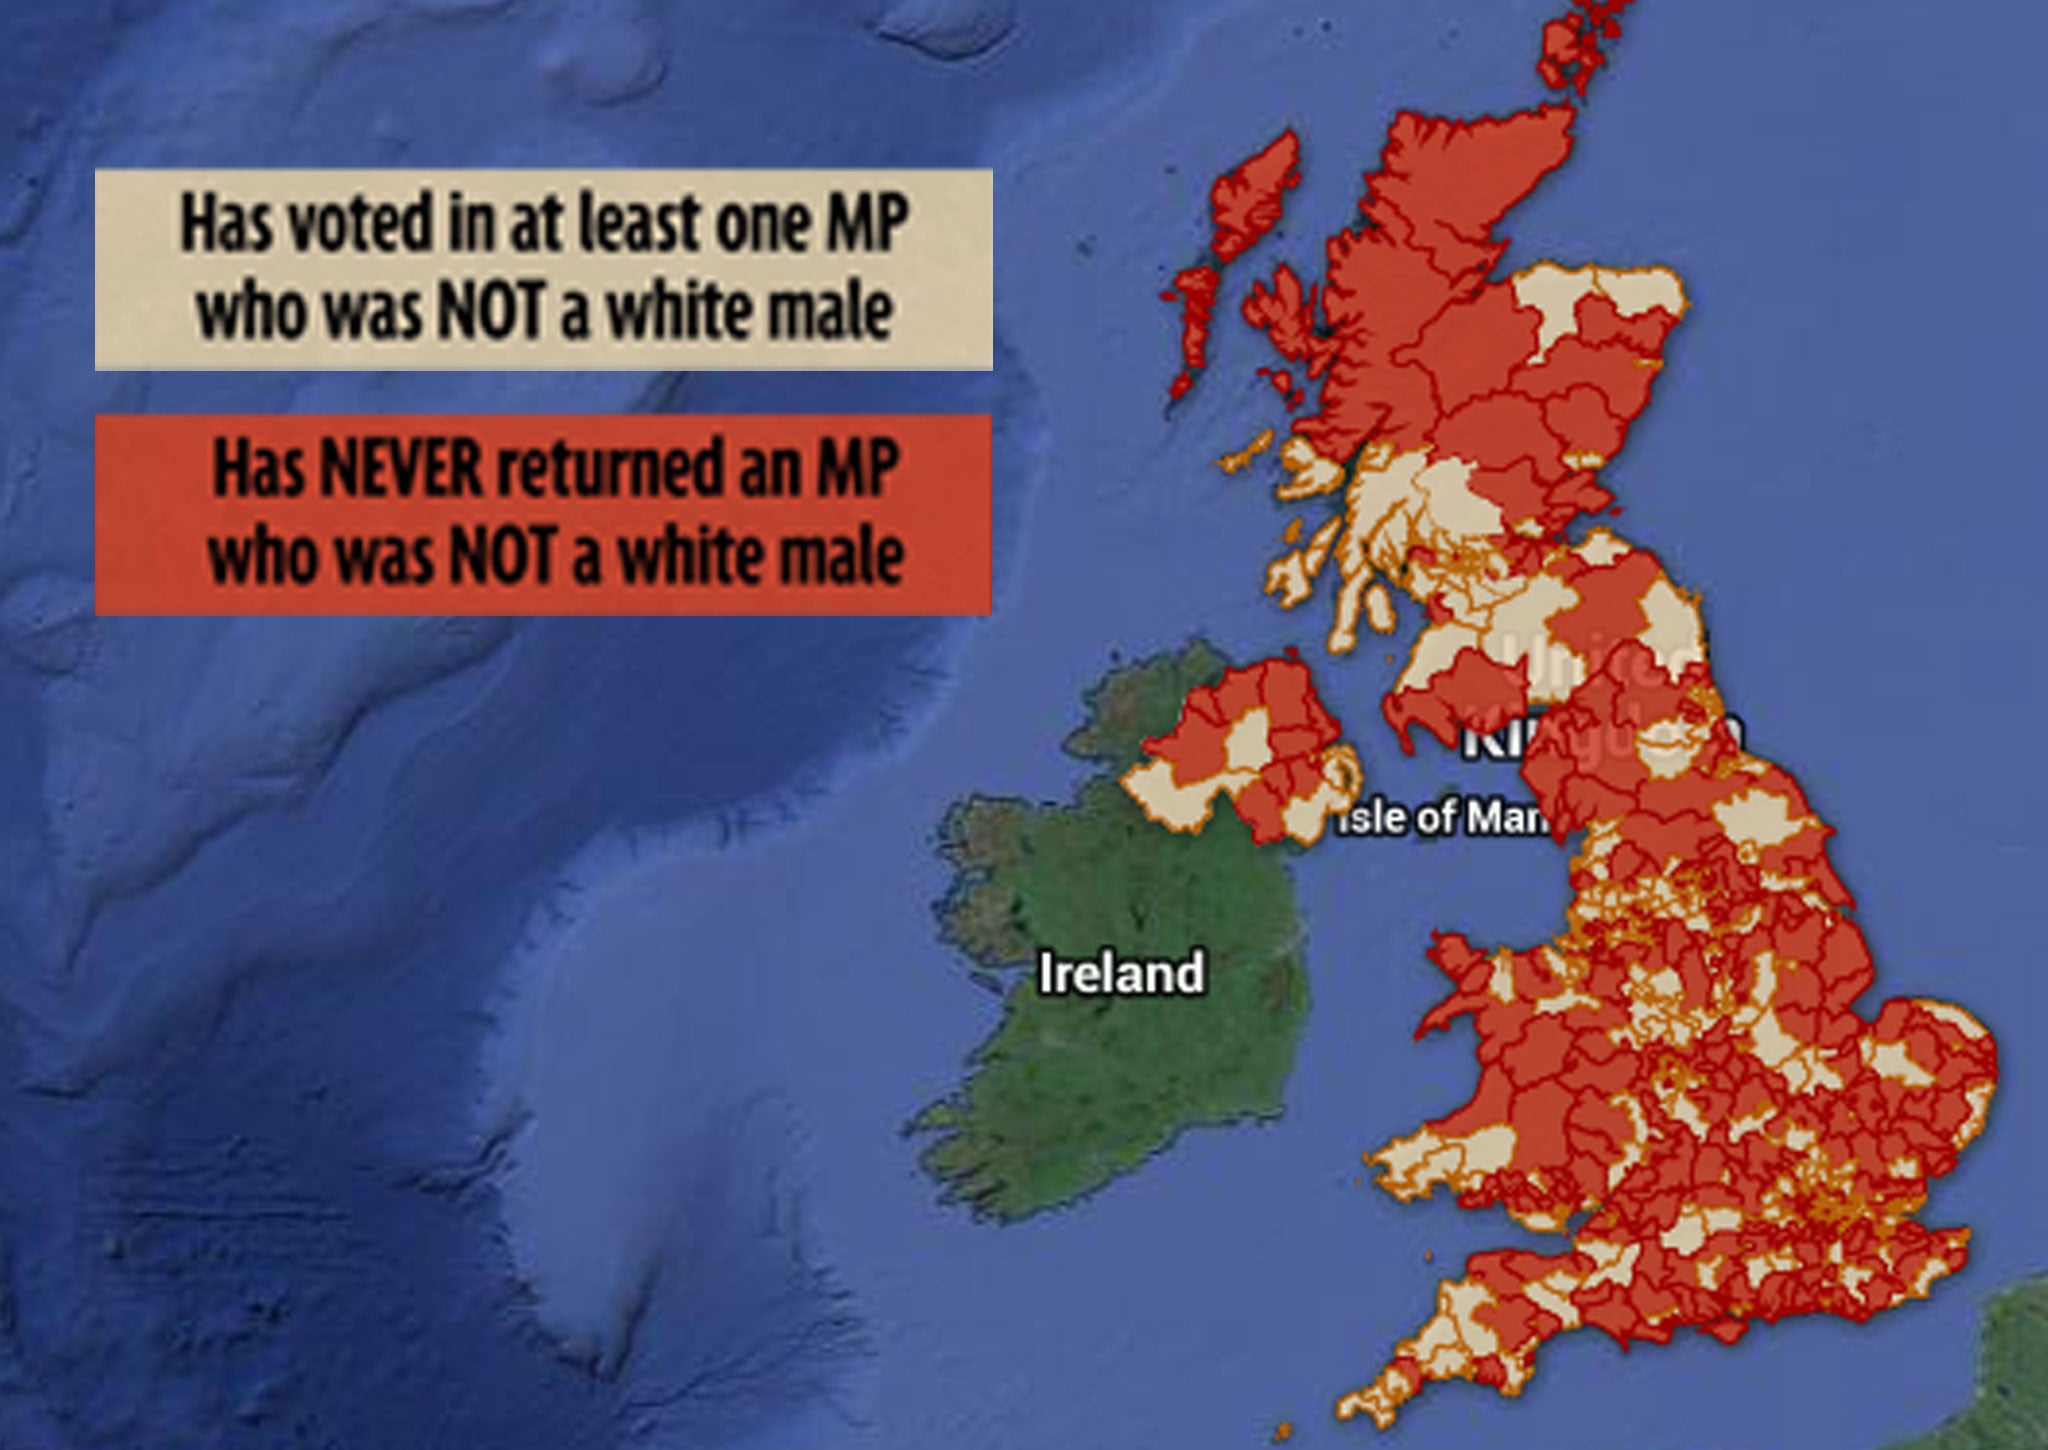 Above: Ampp3d's map on white male MPs